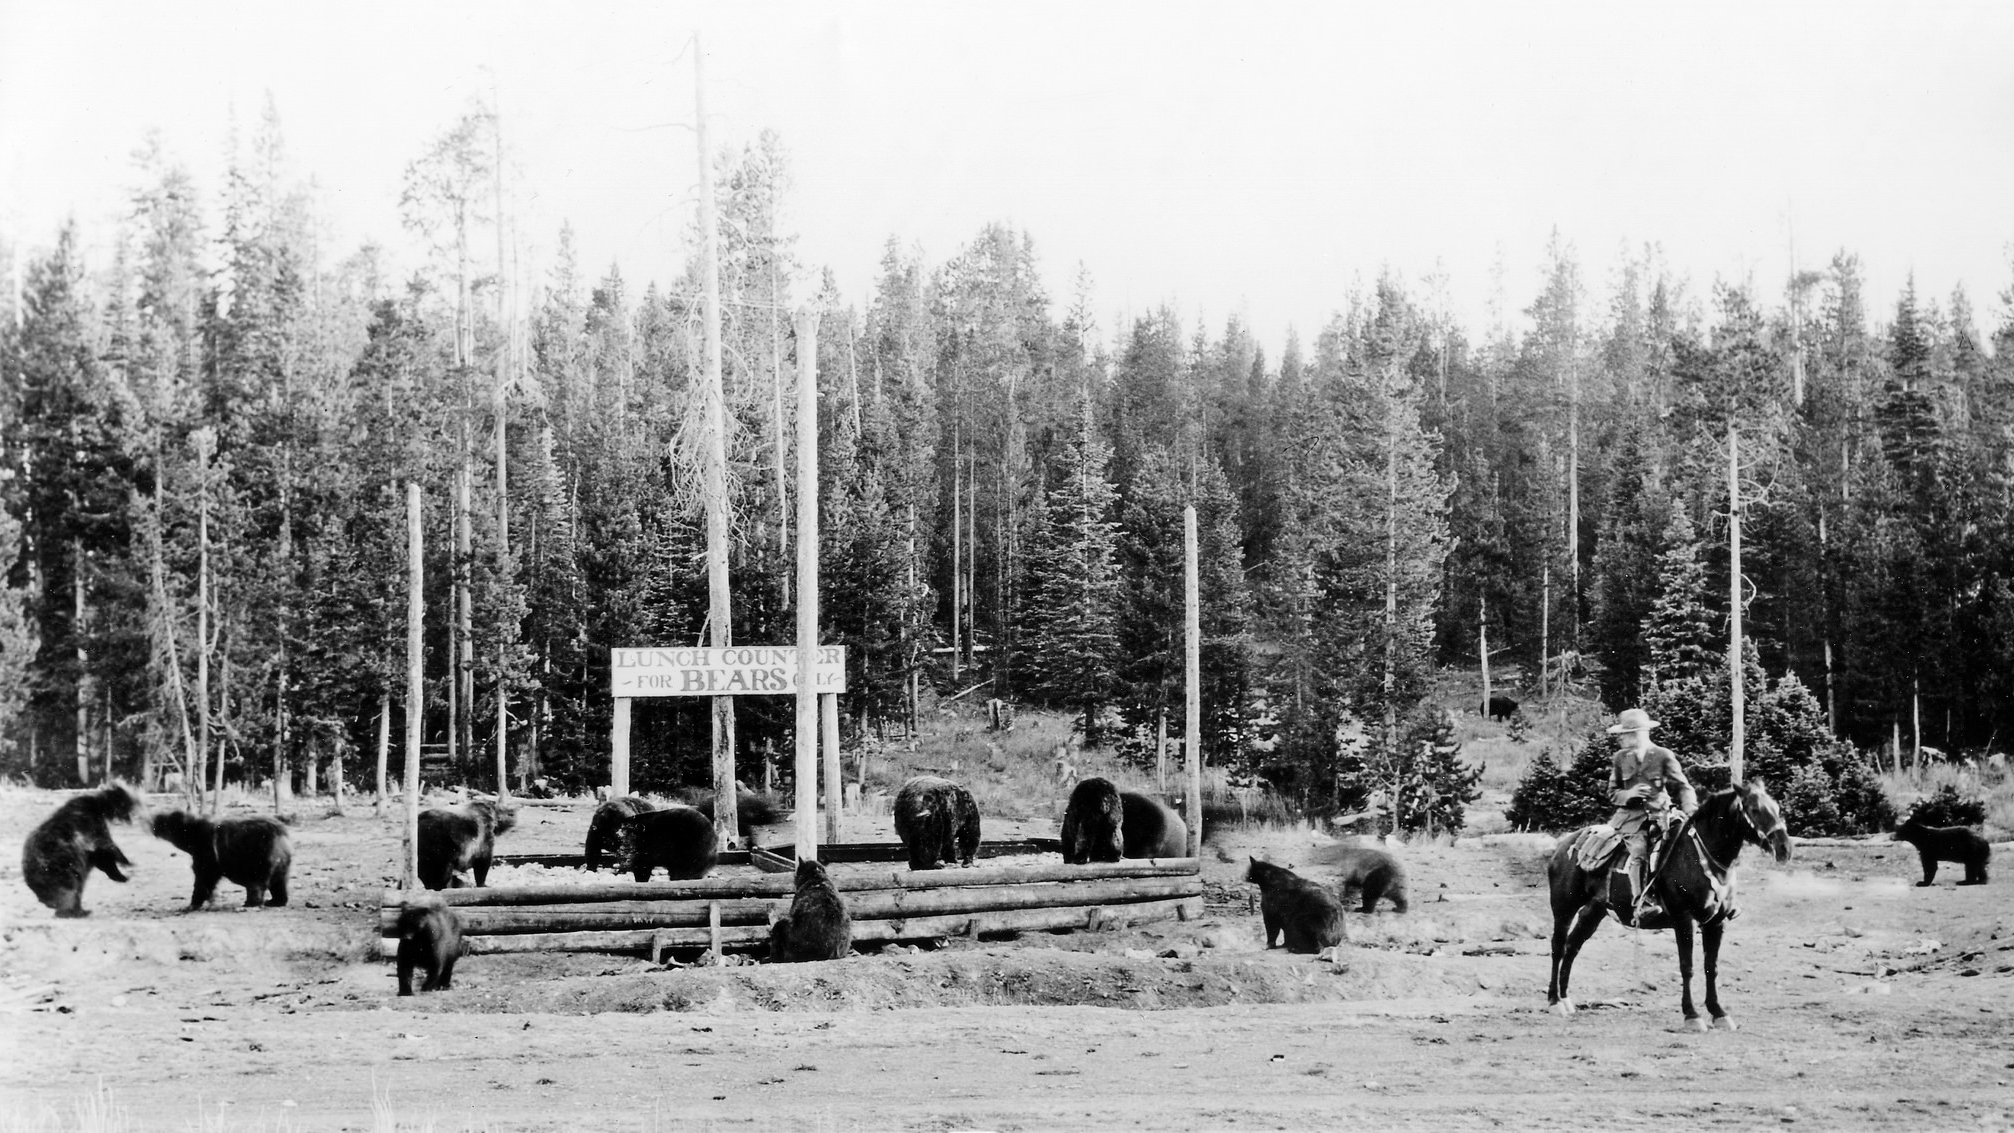  "Lunch Counter - For Bears Only" at Old Faithful, southeast of the upper Hamilton Store, and Ranger Naturalist Walter Phillip Martindale; Photographer unknown; 1921- mid 1930s. Photo via Yellowstone National Park / Flickr in the Public Domain